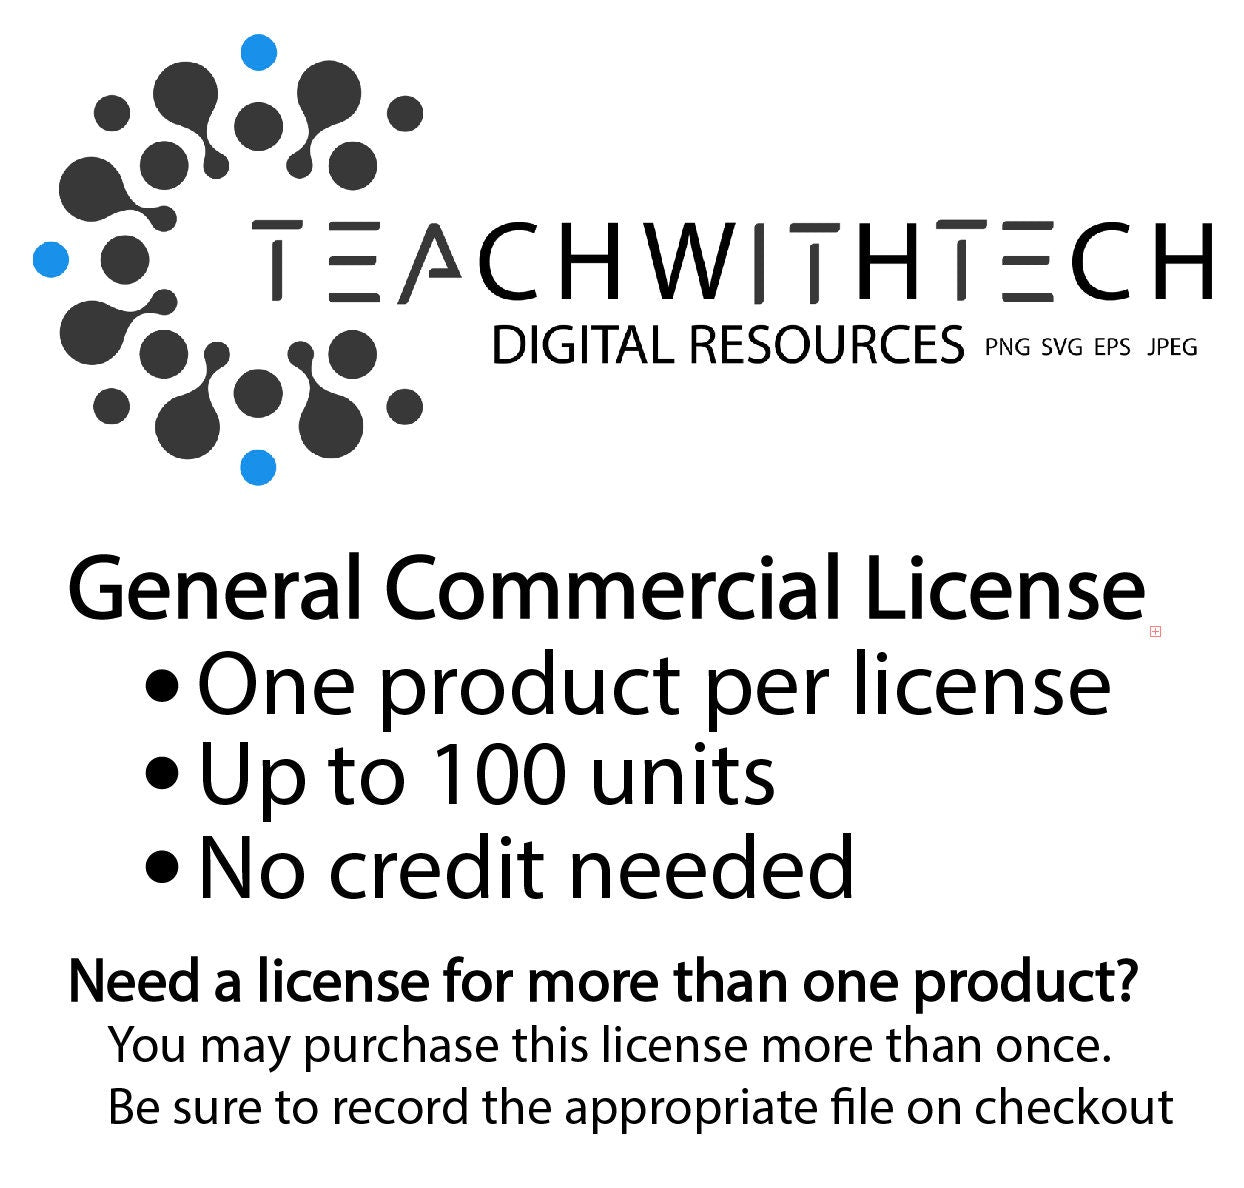 Limited General Commercial Use License for one Digital Listing - Up to 100 Units - No credit Required